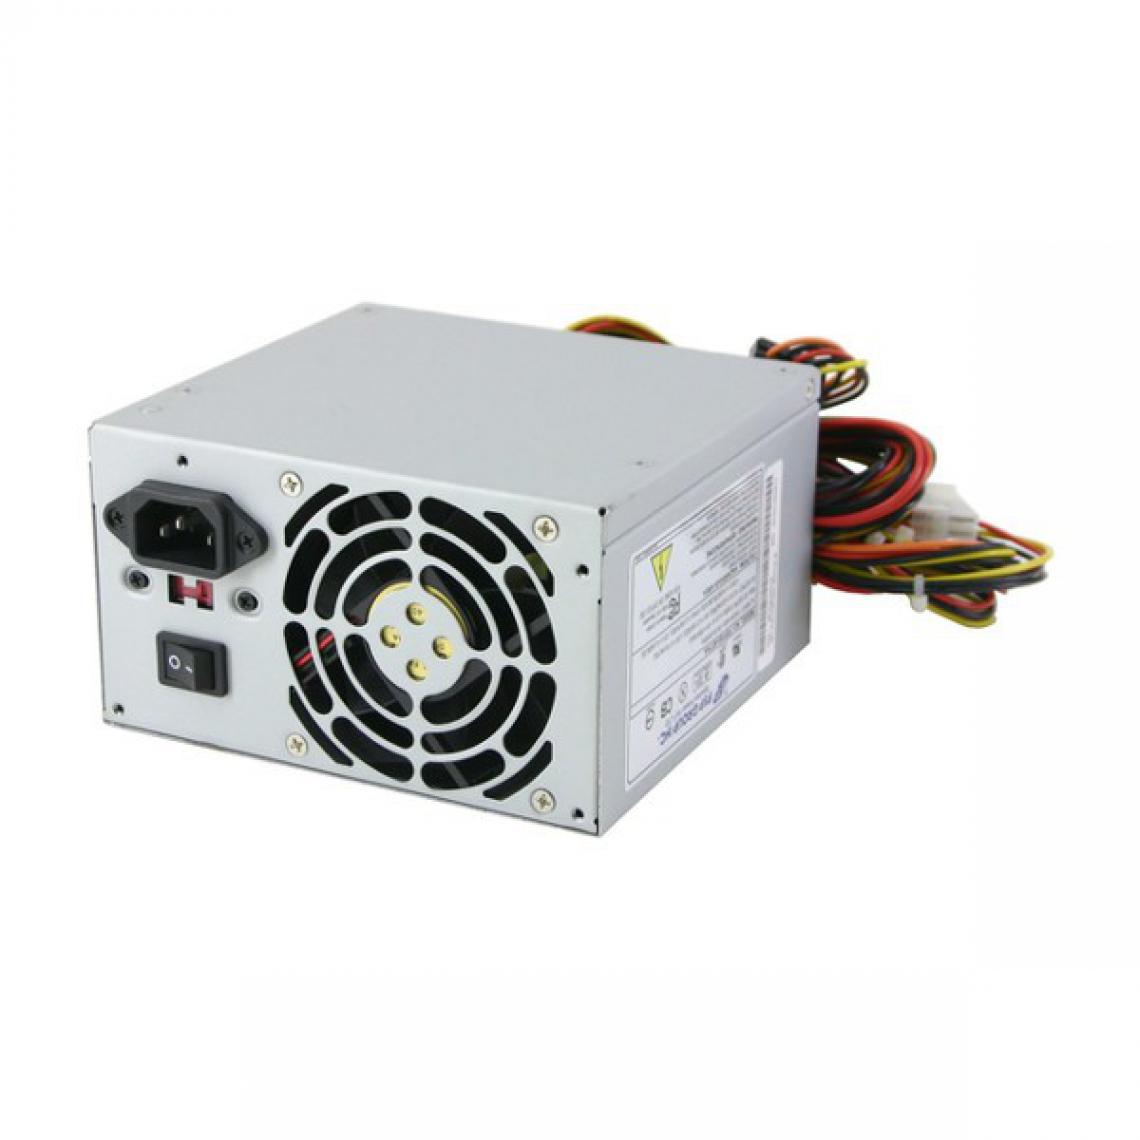 Fortron - Boitier Alimentation PC Fortron FSP350-60THA-P 350W ATX 9PA35035003 Power Supply - Alimentation modulaire